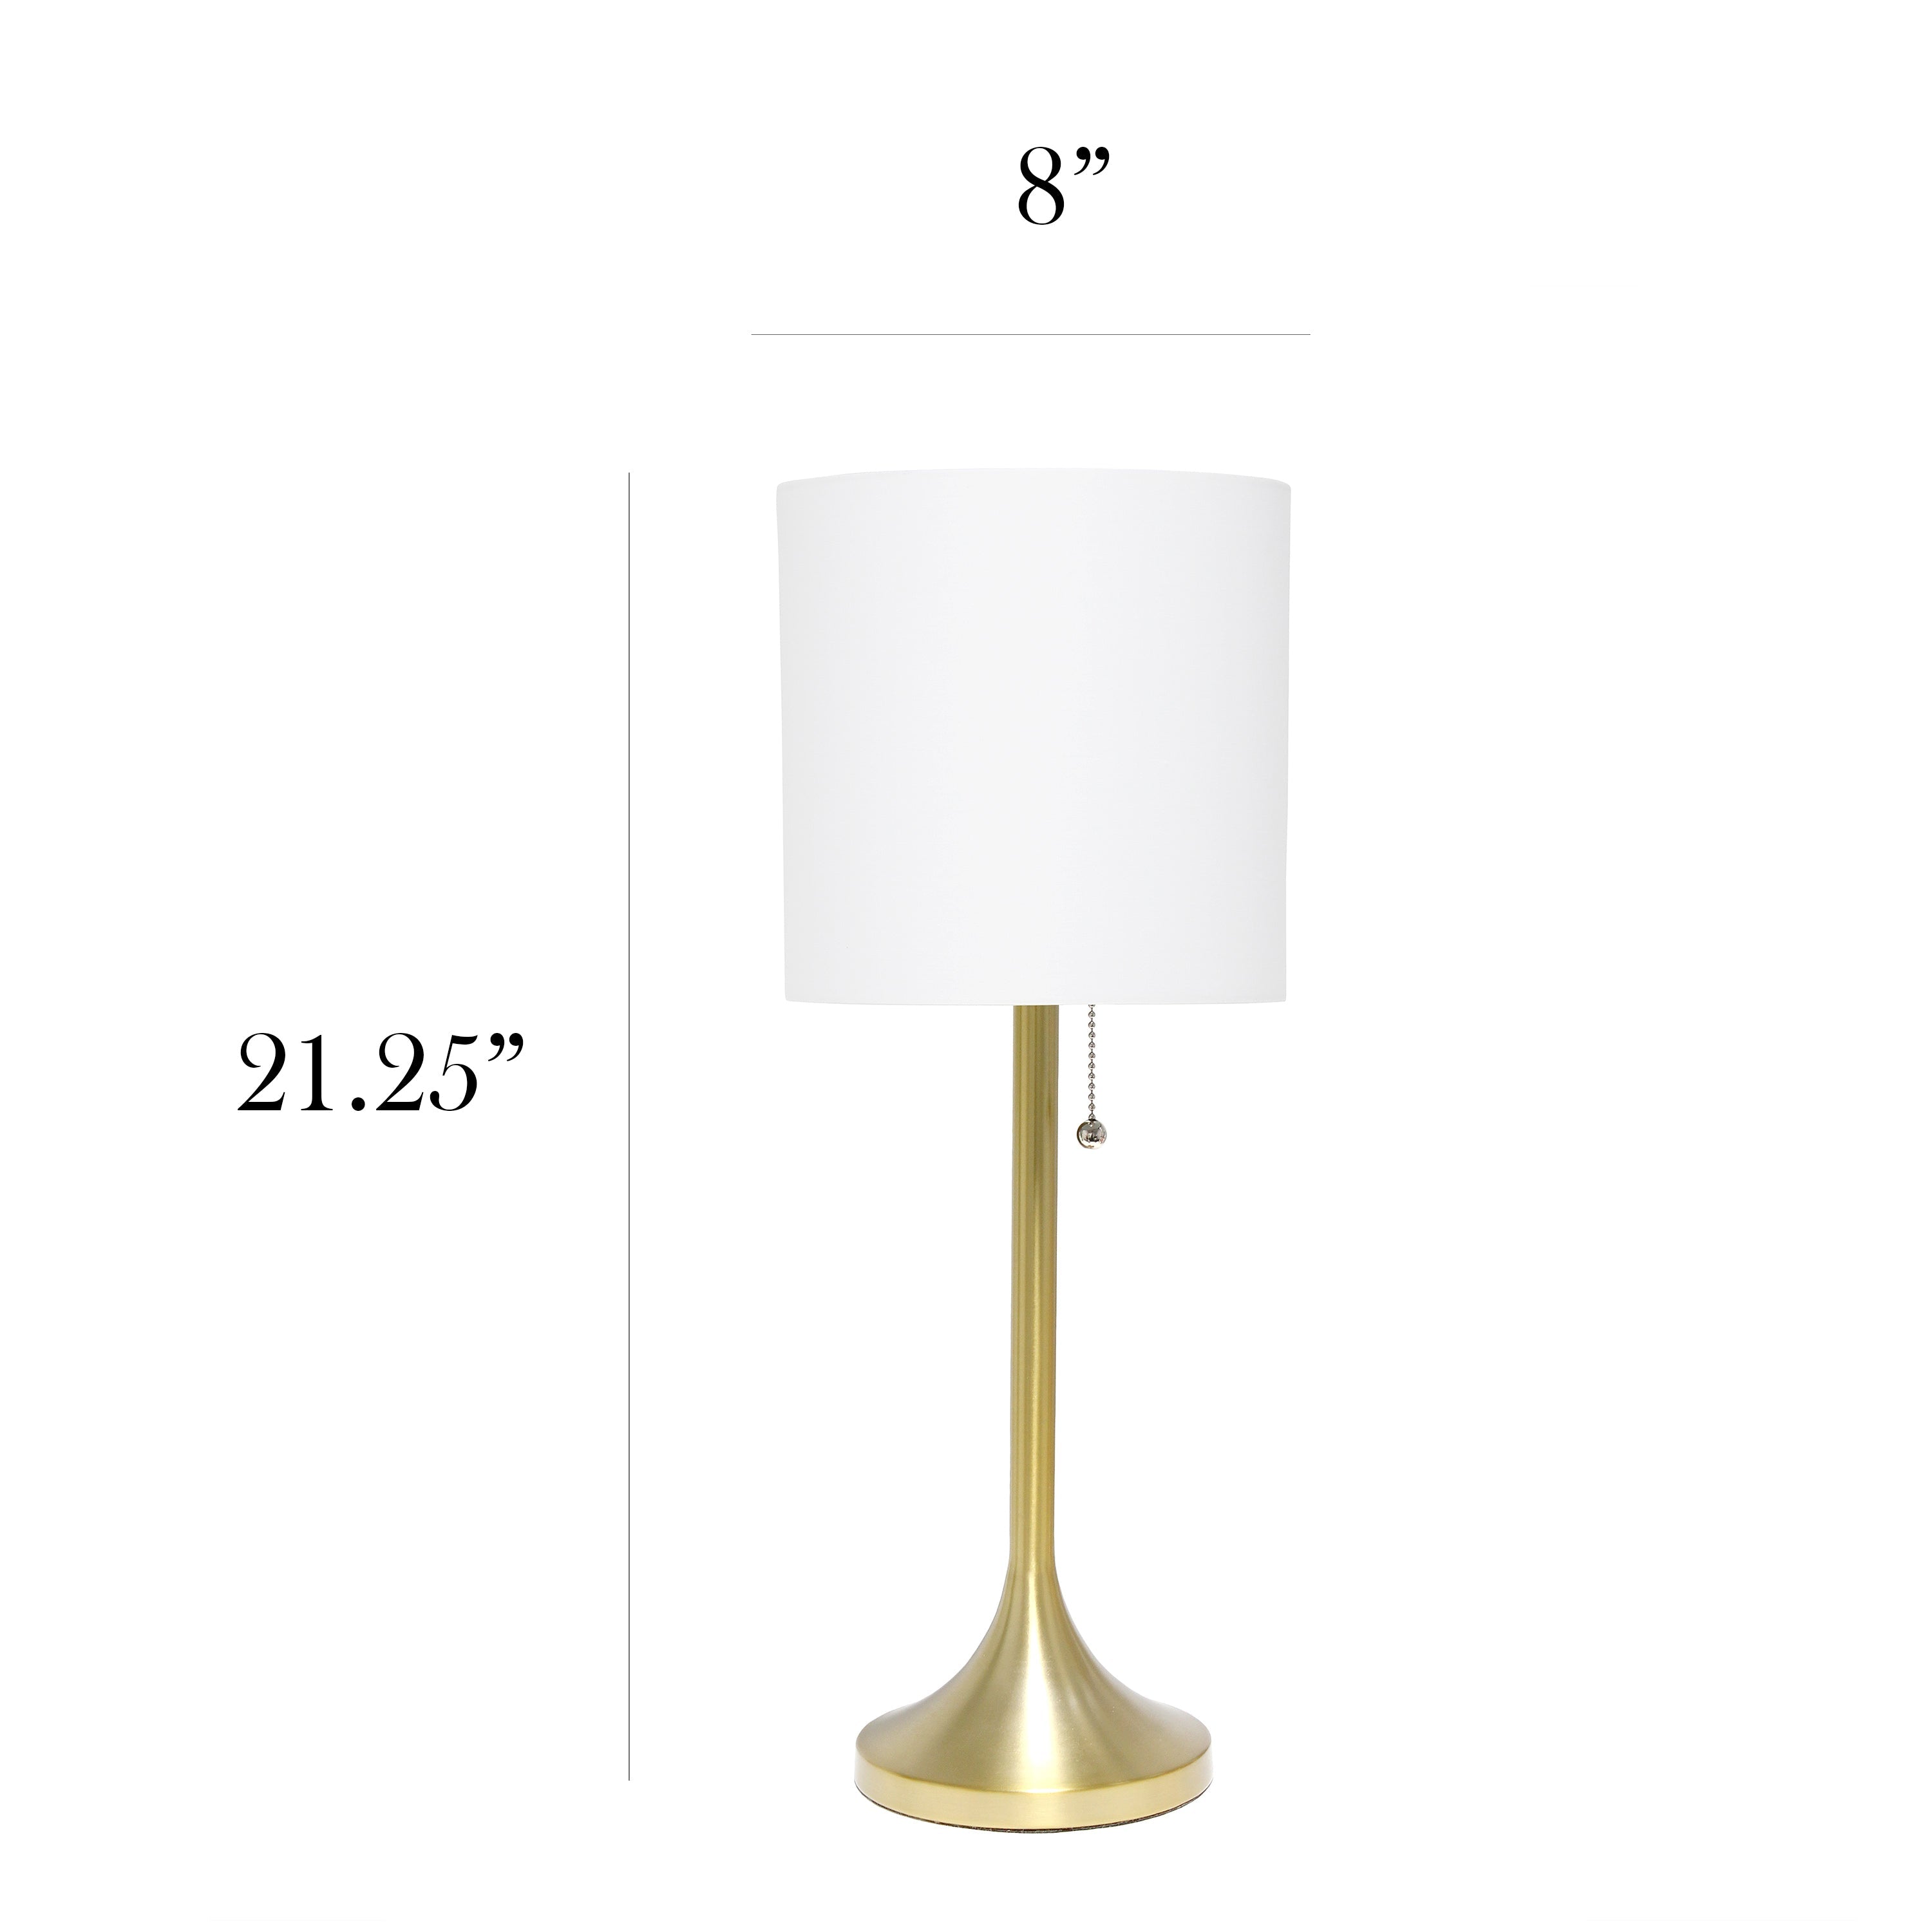 Simple Designs LT1076-GDW Tapered Fabric Drum Shade Table Lamp, Gold/White